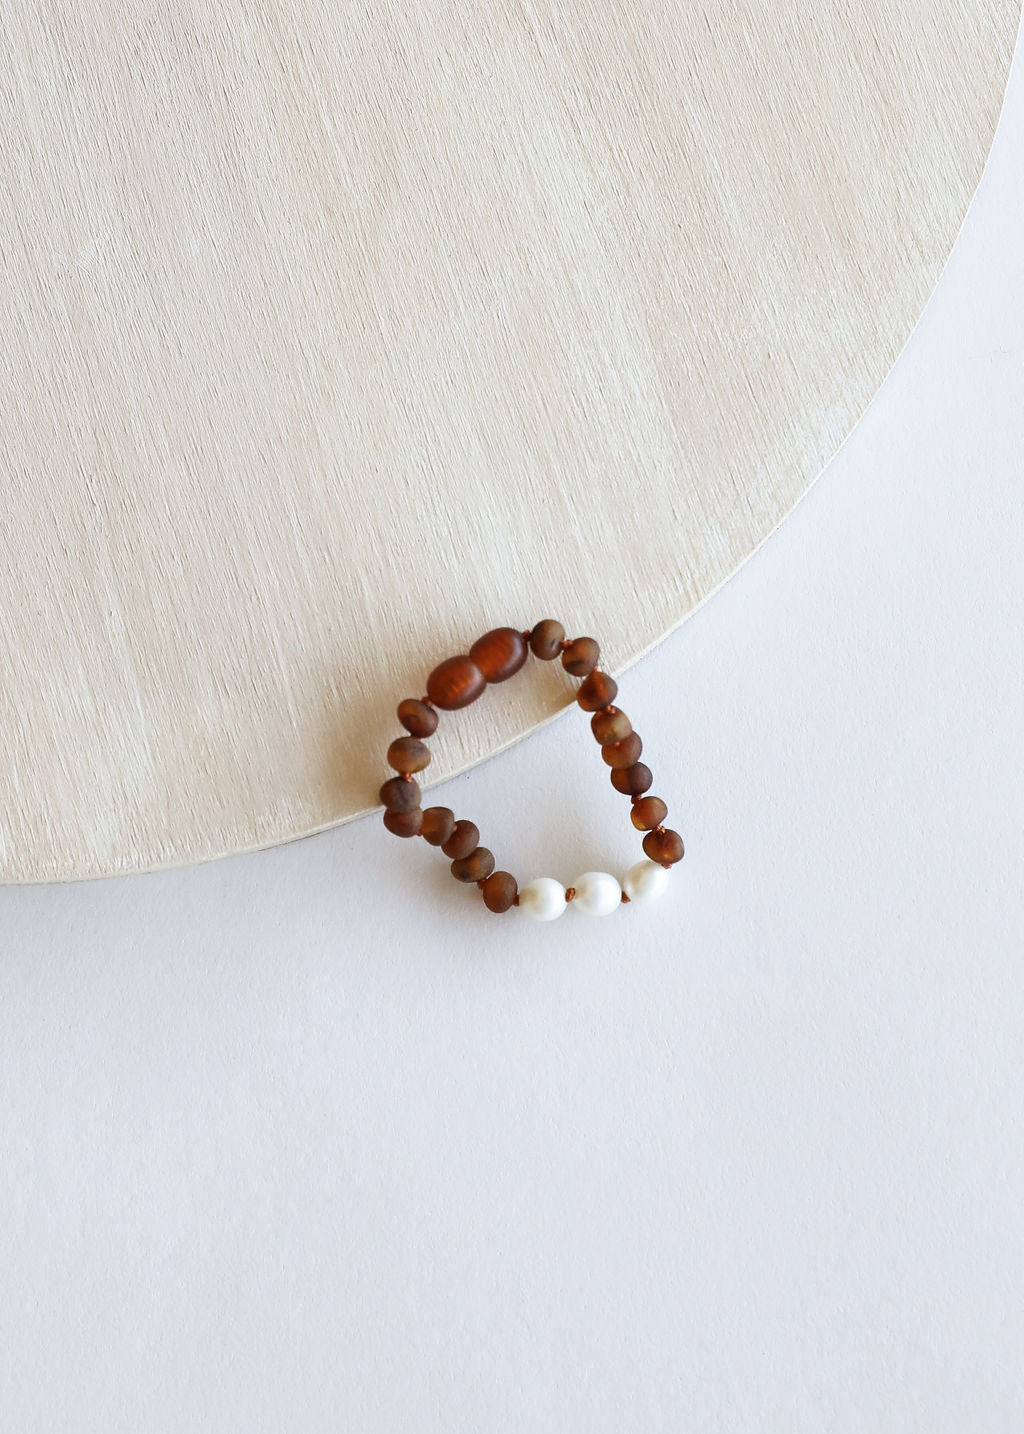 Raw Cognac Baltic Amber + Pearls || Anklet or Bracelet